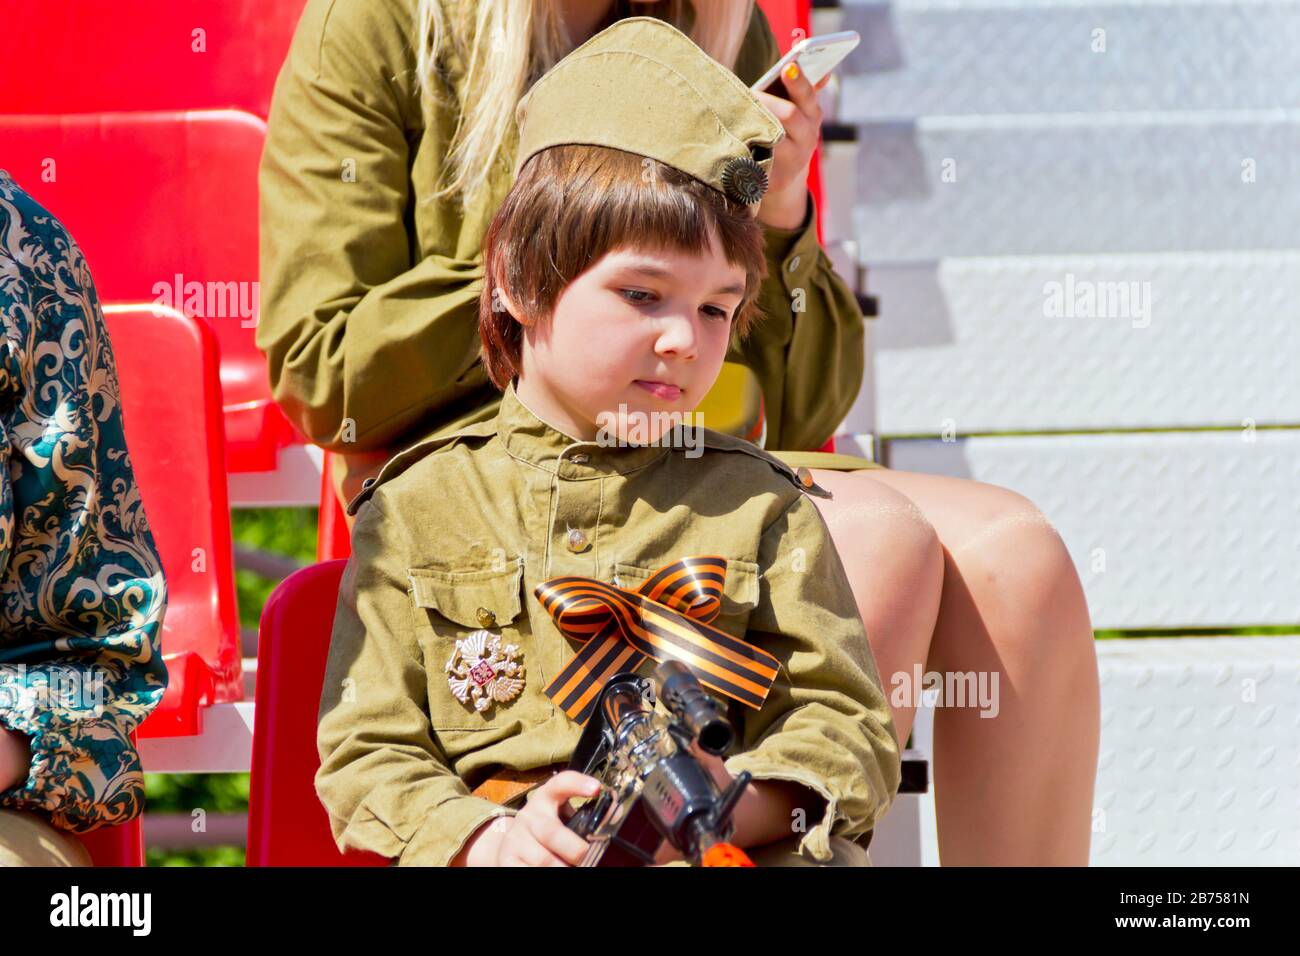 SAMARA, RUSSIA - MAY 9, 2016: Boy in soldier costume at the honor of annual Victory Day, May, 9, 2016 in Samara, Russia Stock Photo